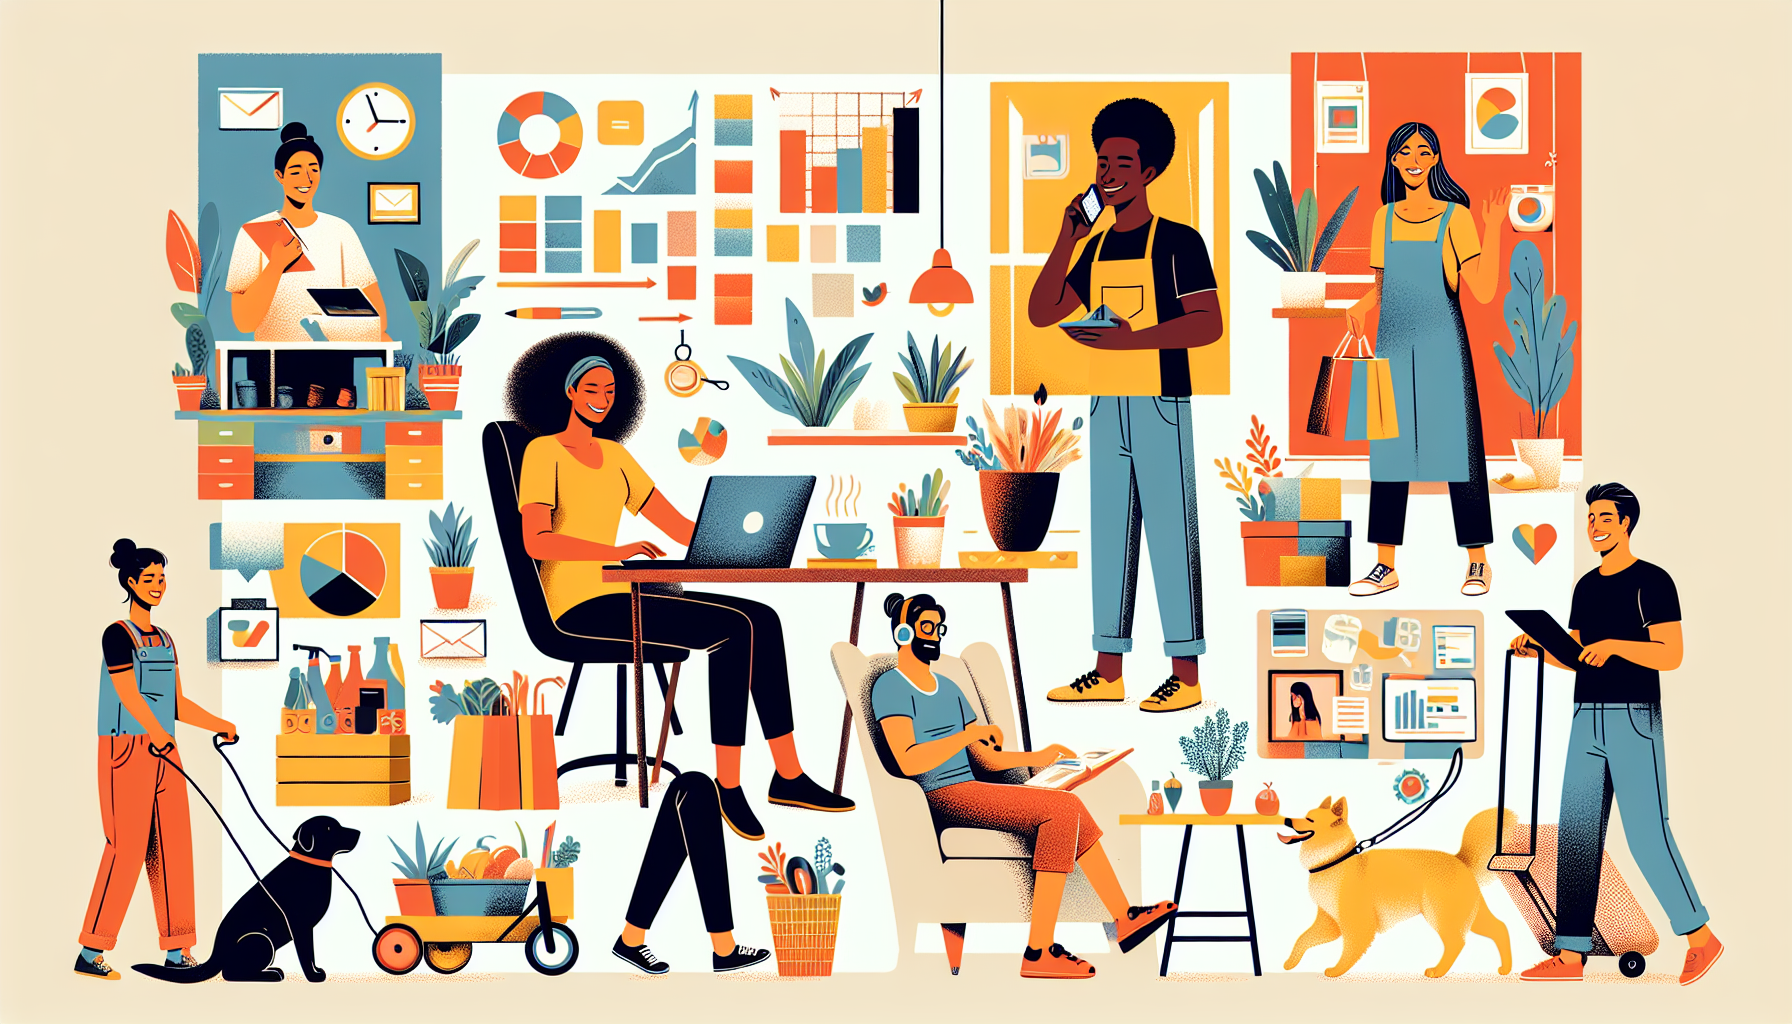 Create an image of a diverse group of people happily engaging in various side hustles. Show one person freelancing on a laptop, another delivering groceries, someone walking a dog, a person crafting handmade items, and another one conducting an online tutoring session. The background features a cozy home office setting with elements that represent creativity, productivity, and financial growth, such as charts, graphs, and cheerful decor. The overall tone should be uplifting and motivational, depicting the idea of generating extra income through side hustles.